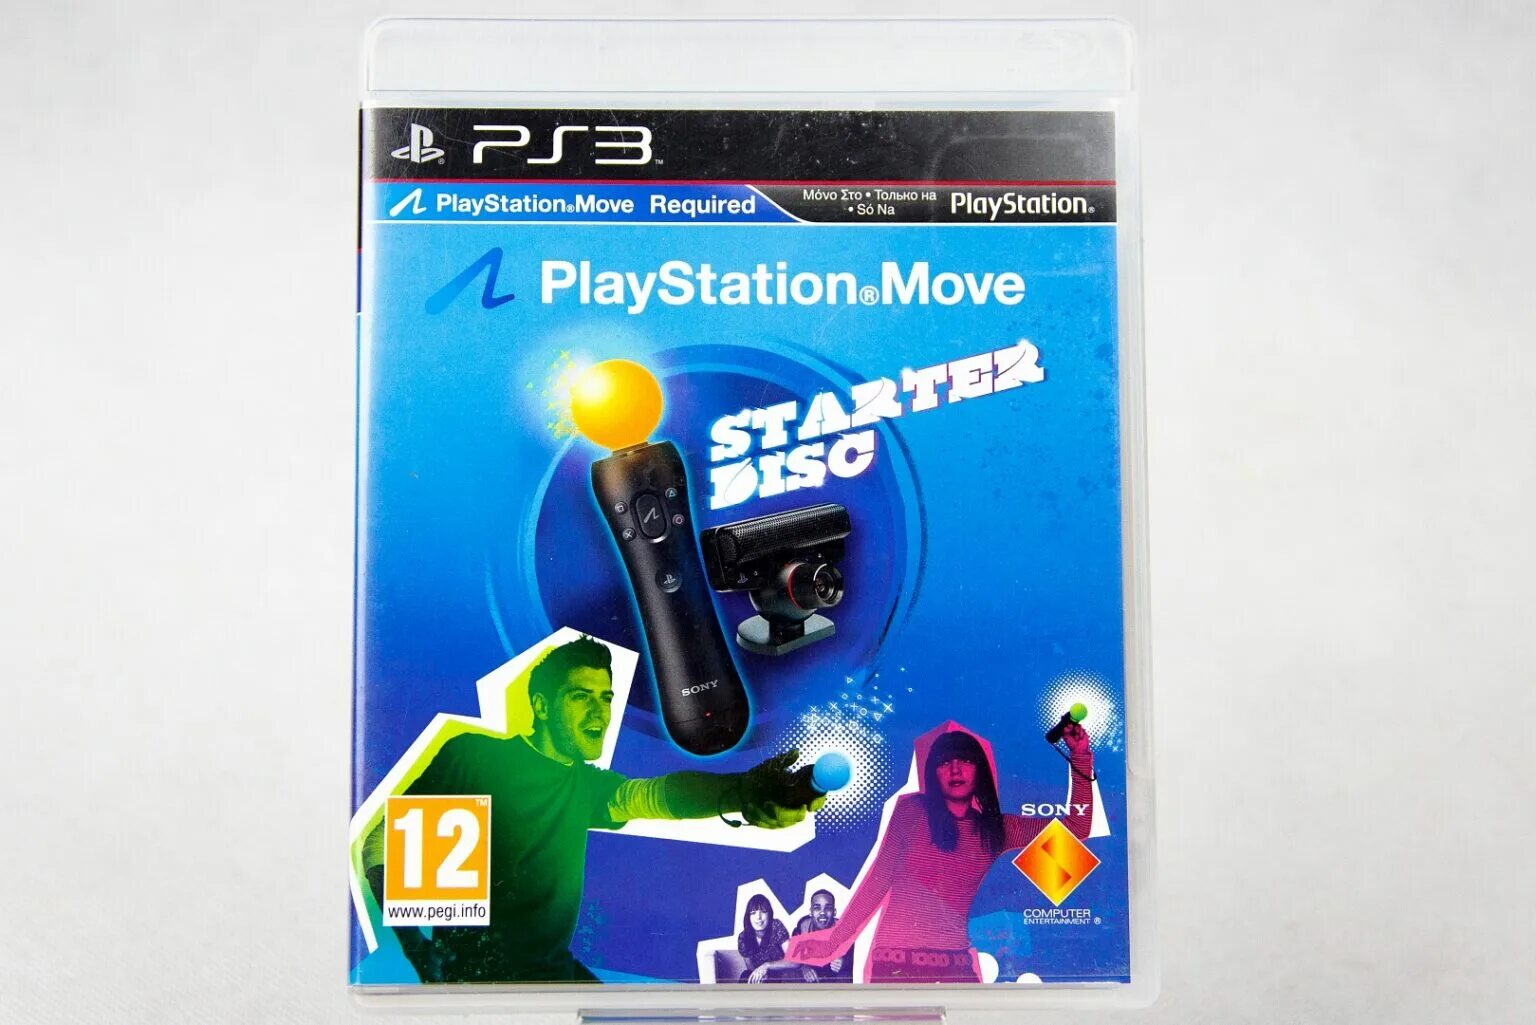 Игра starter. Ps3 коробка + Starter Disc (move).. PLAYSTATION Starter Disc. Ps3 move. Диск для ps3 гонки PS move.